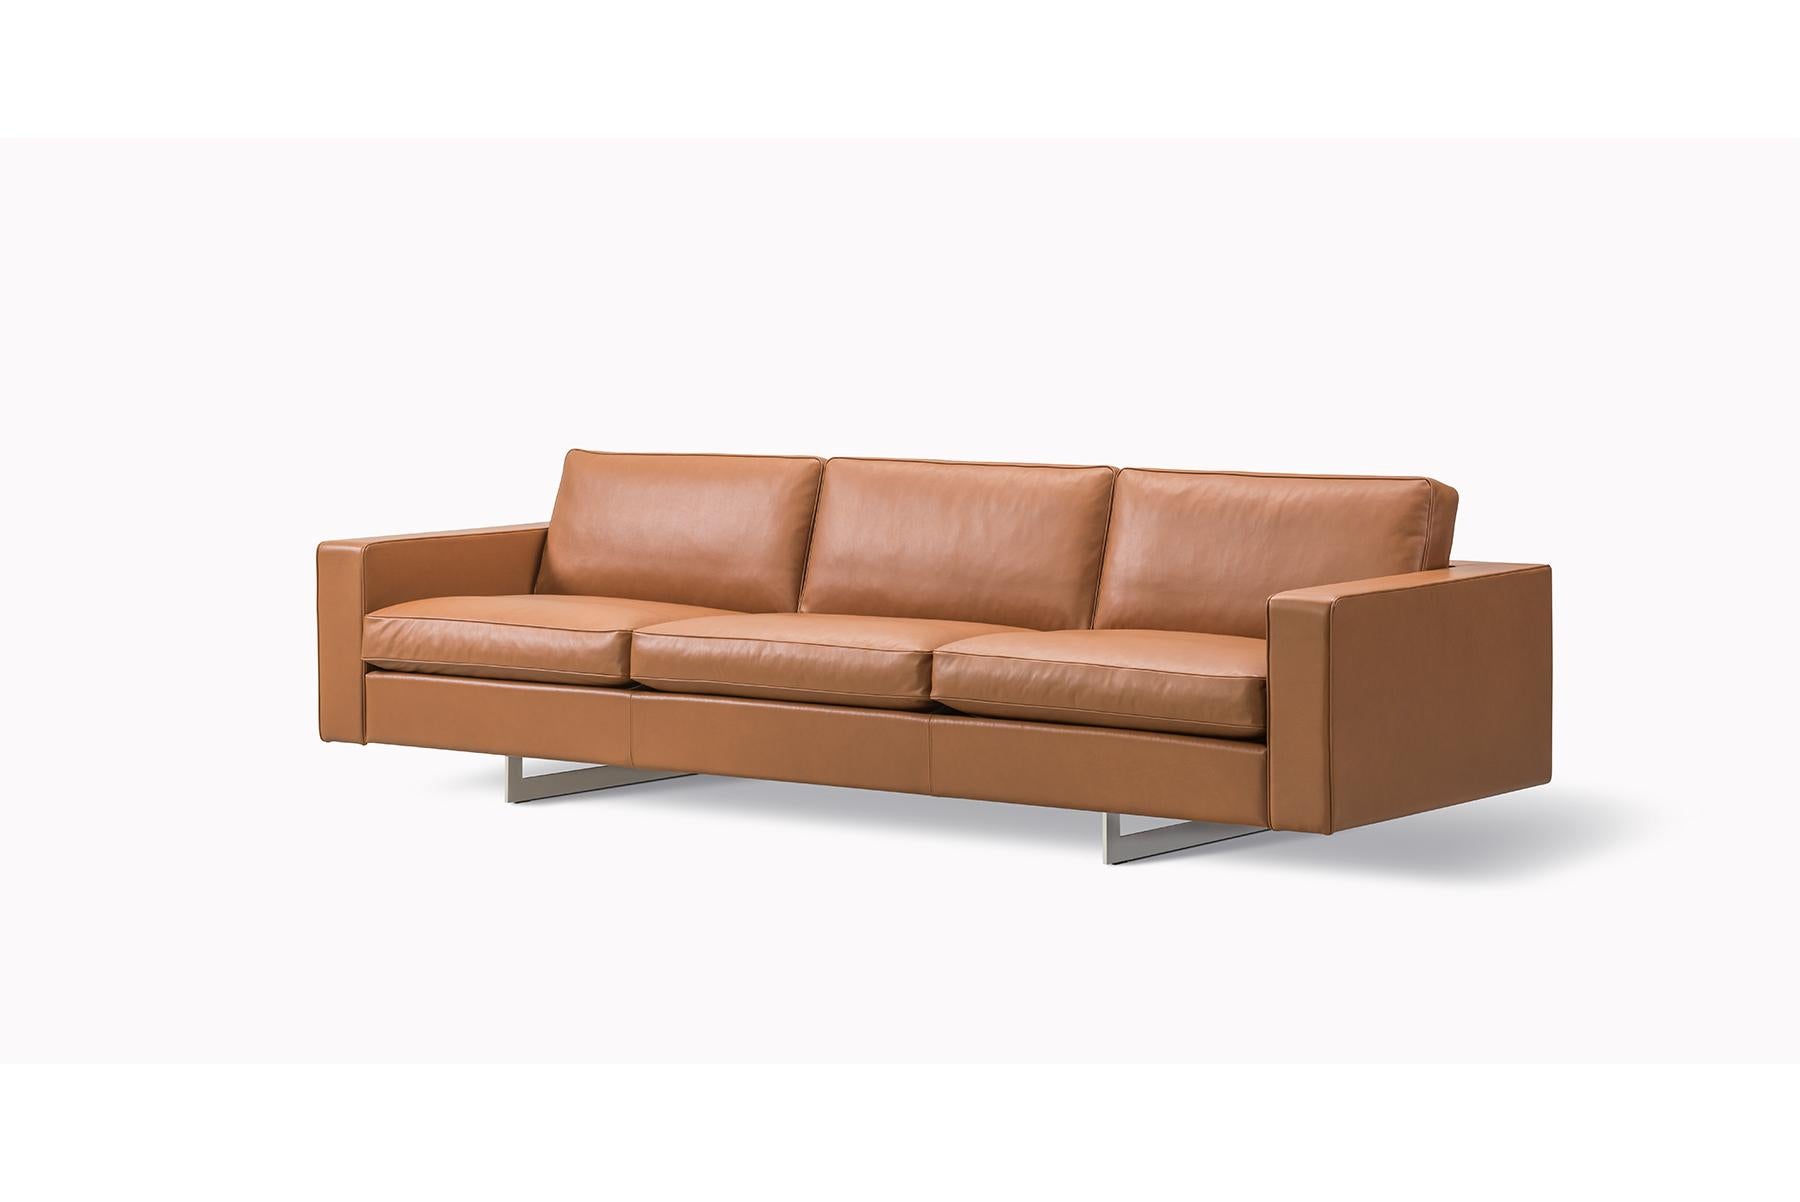 Risom 65 sofa – 3 seater – metal base originally designed by Jens Risom in 1961 the A-chair is a graceful expression of an elegant, upholstered chair in a timeless design, boasting an A-frame in the back for added support and as signature detail.